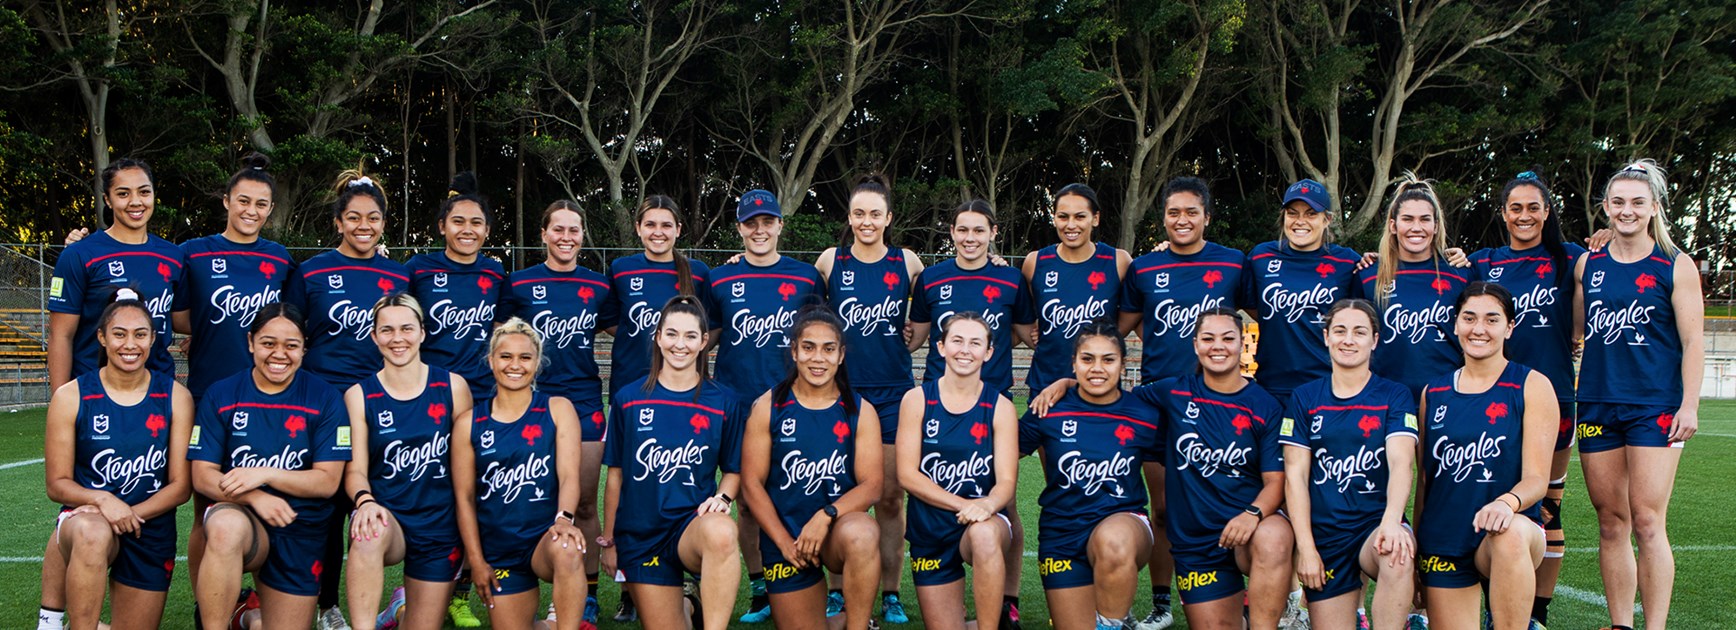 Roosters announce 2020 NRLW Squad